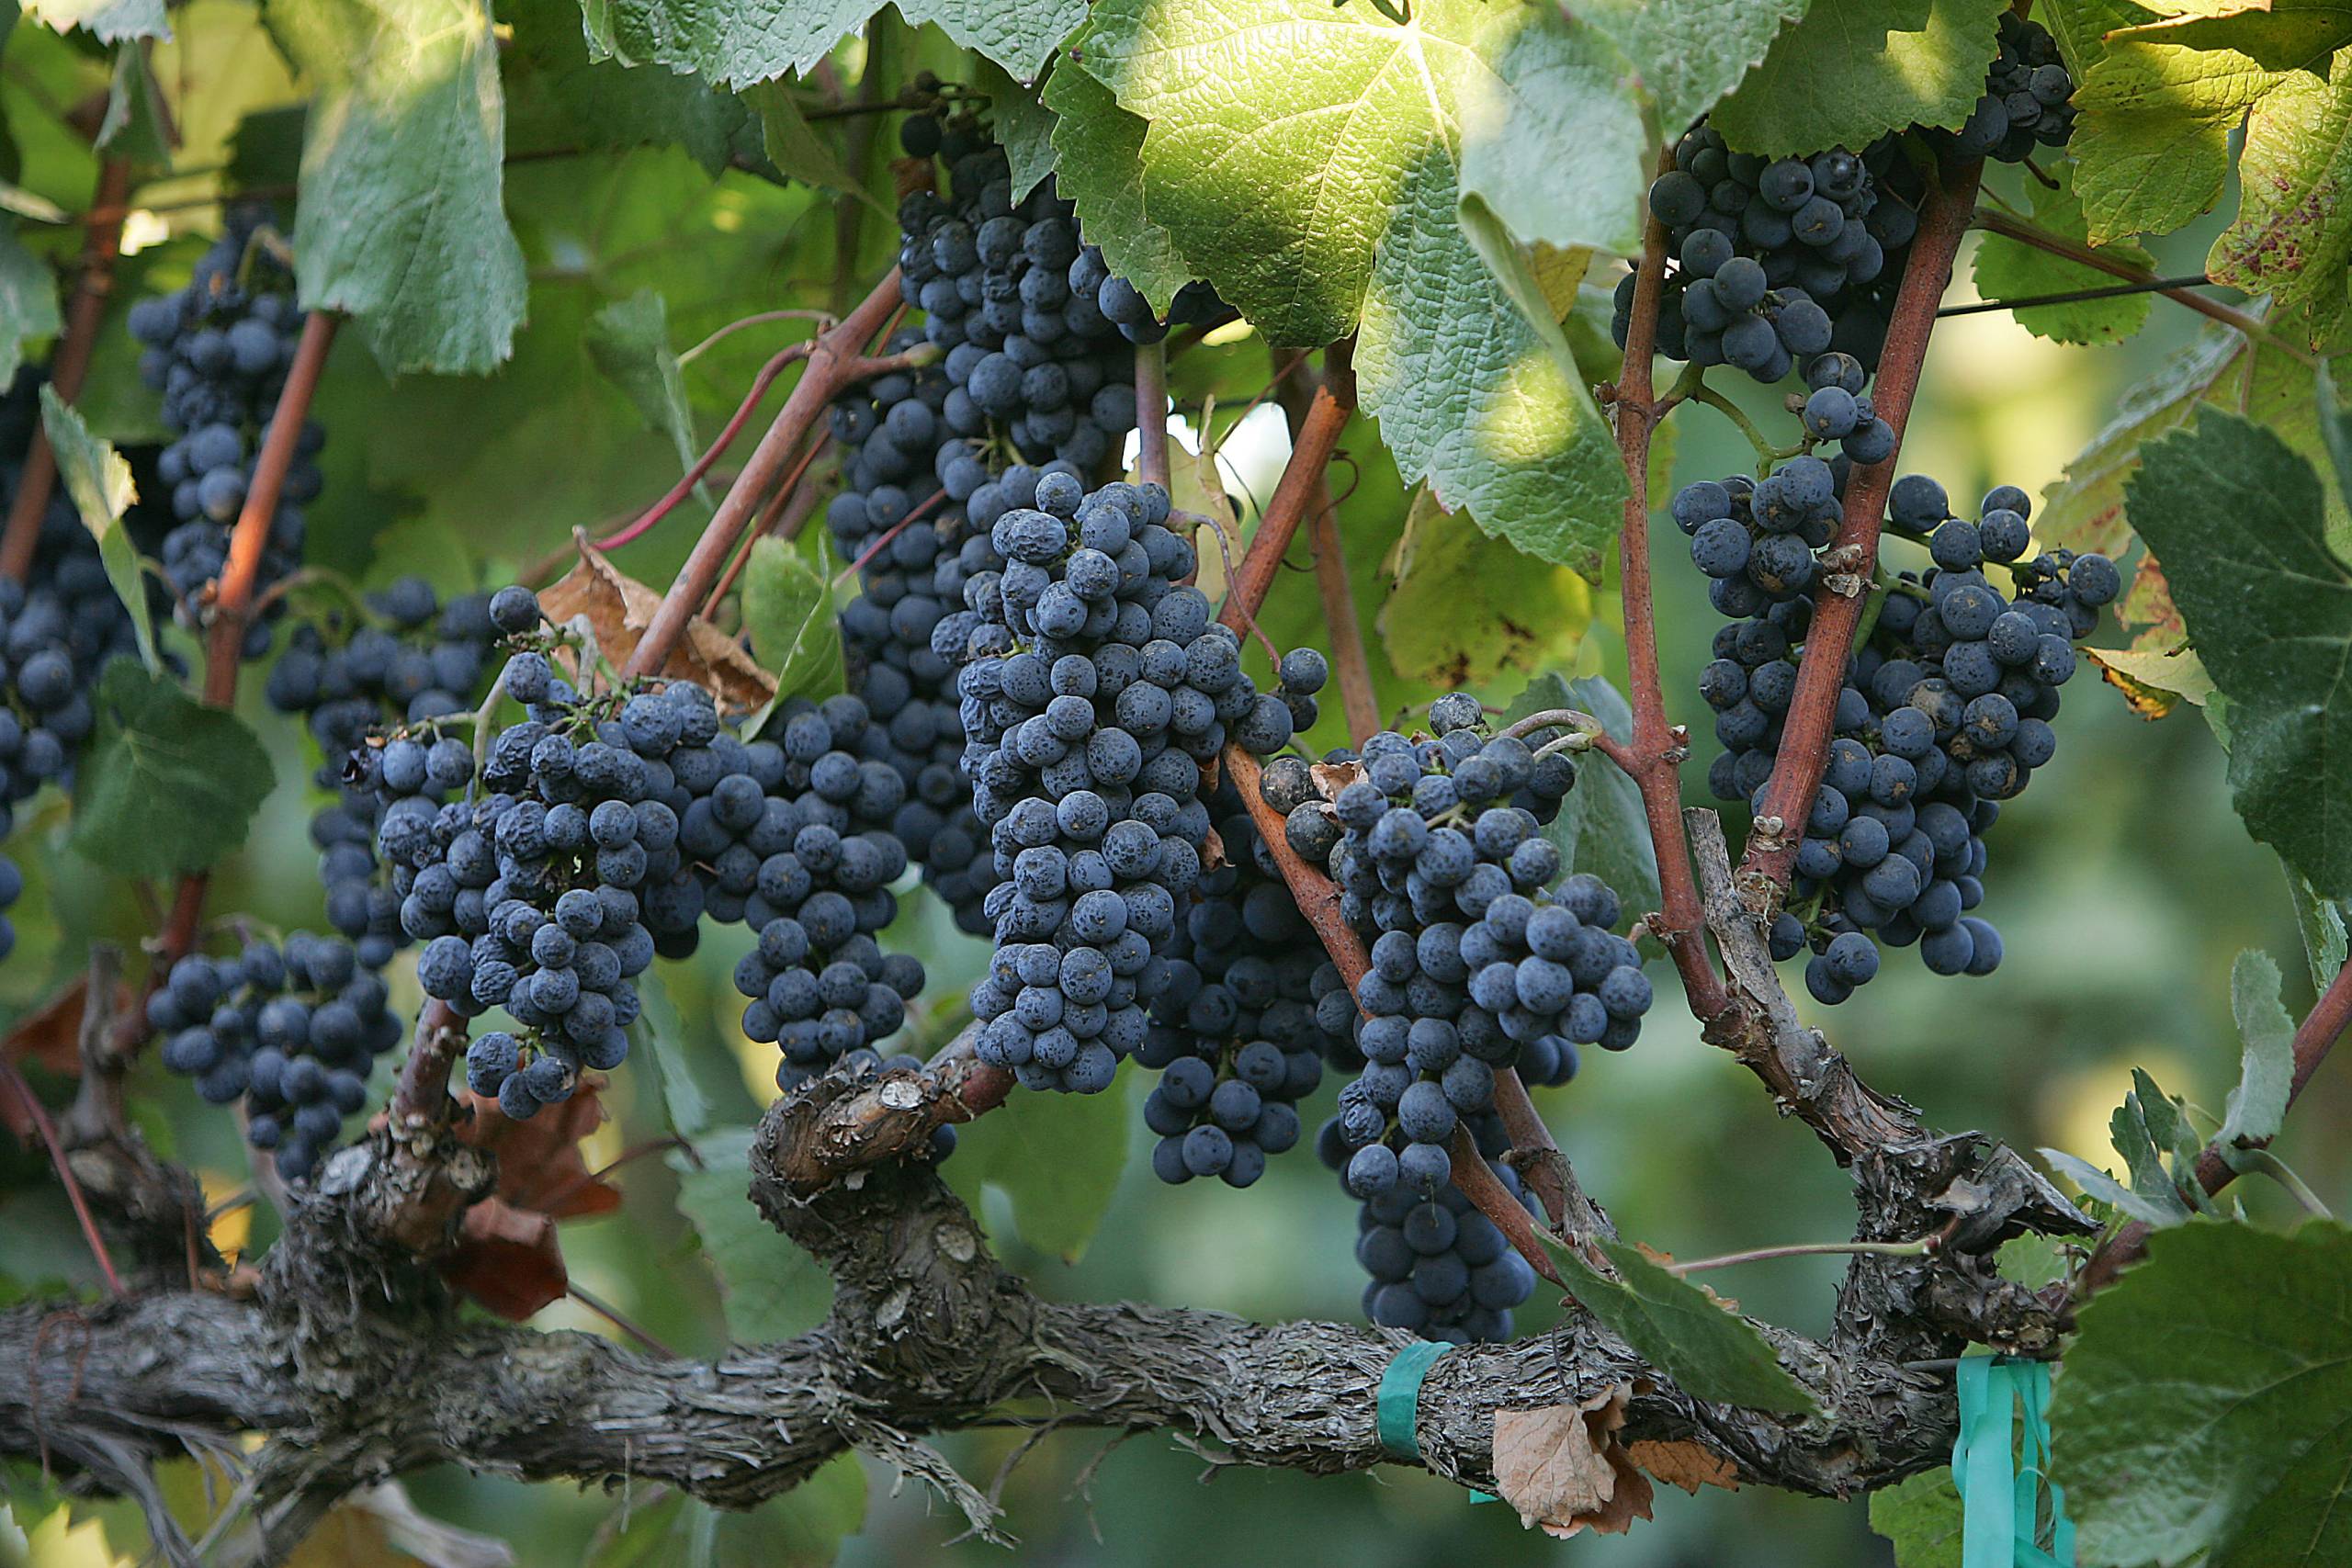 Dark purple grapes hang from a grapevine with sun-kissed leaves.